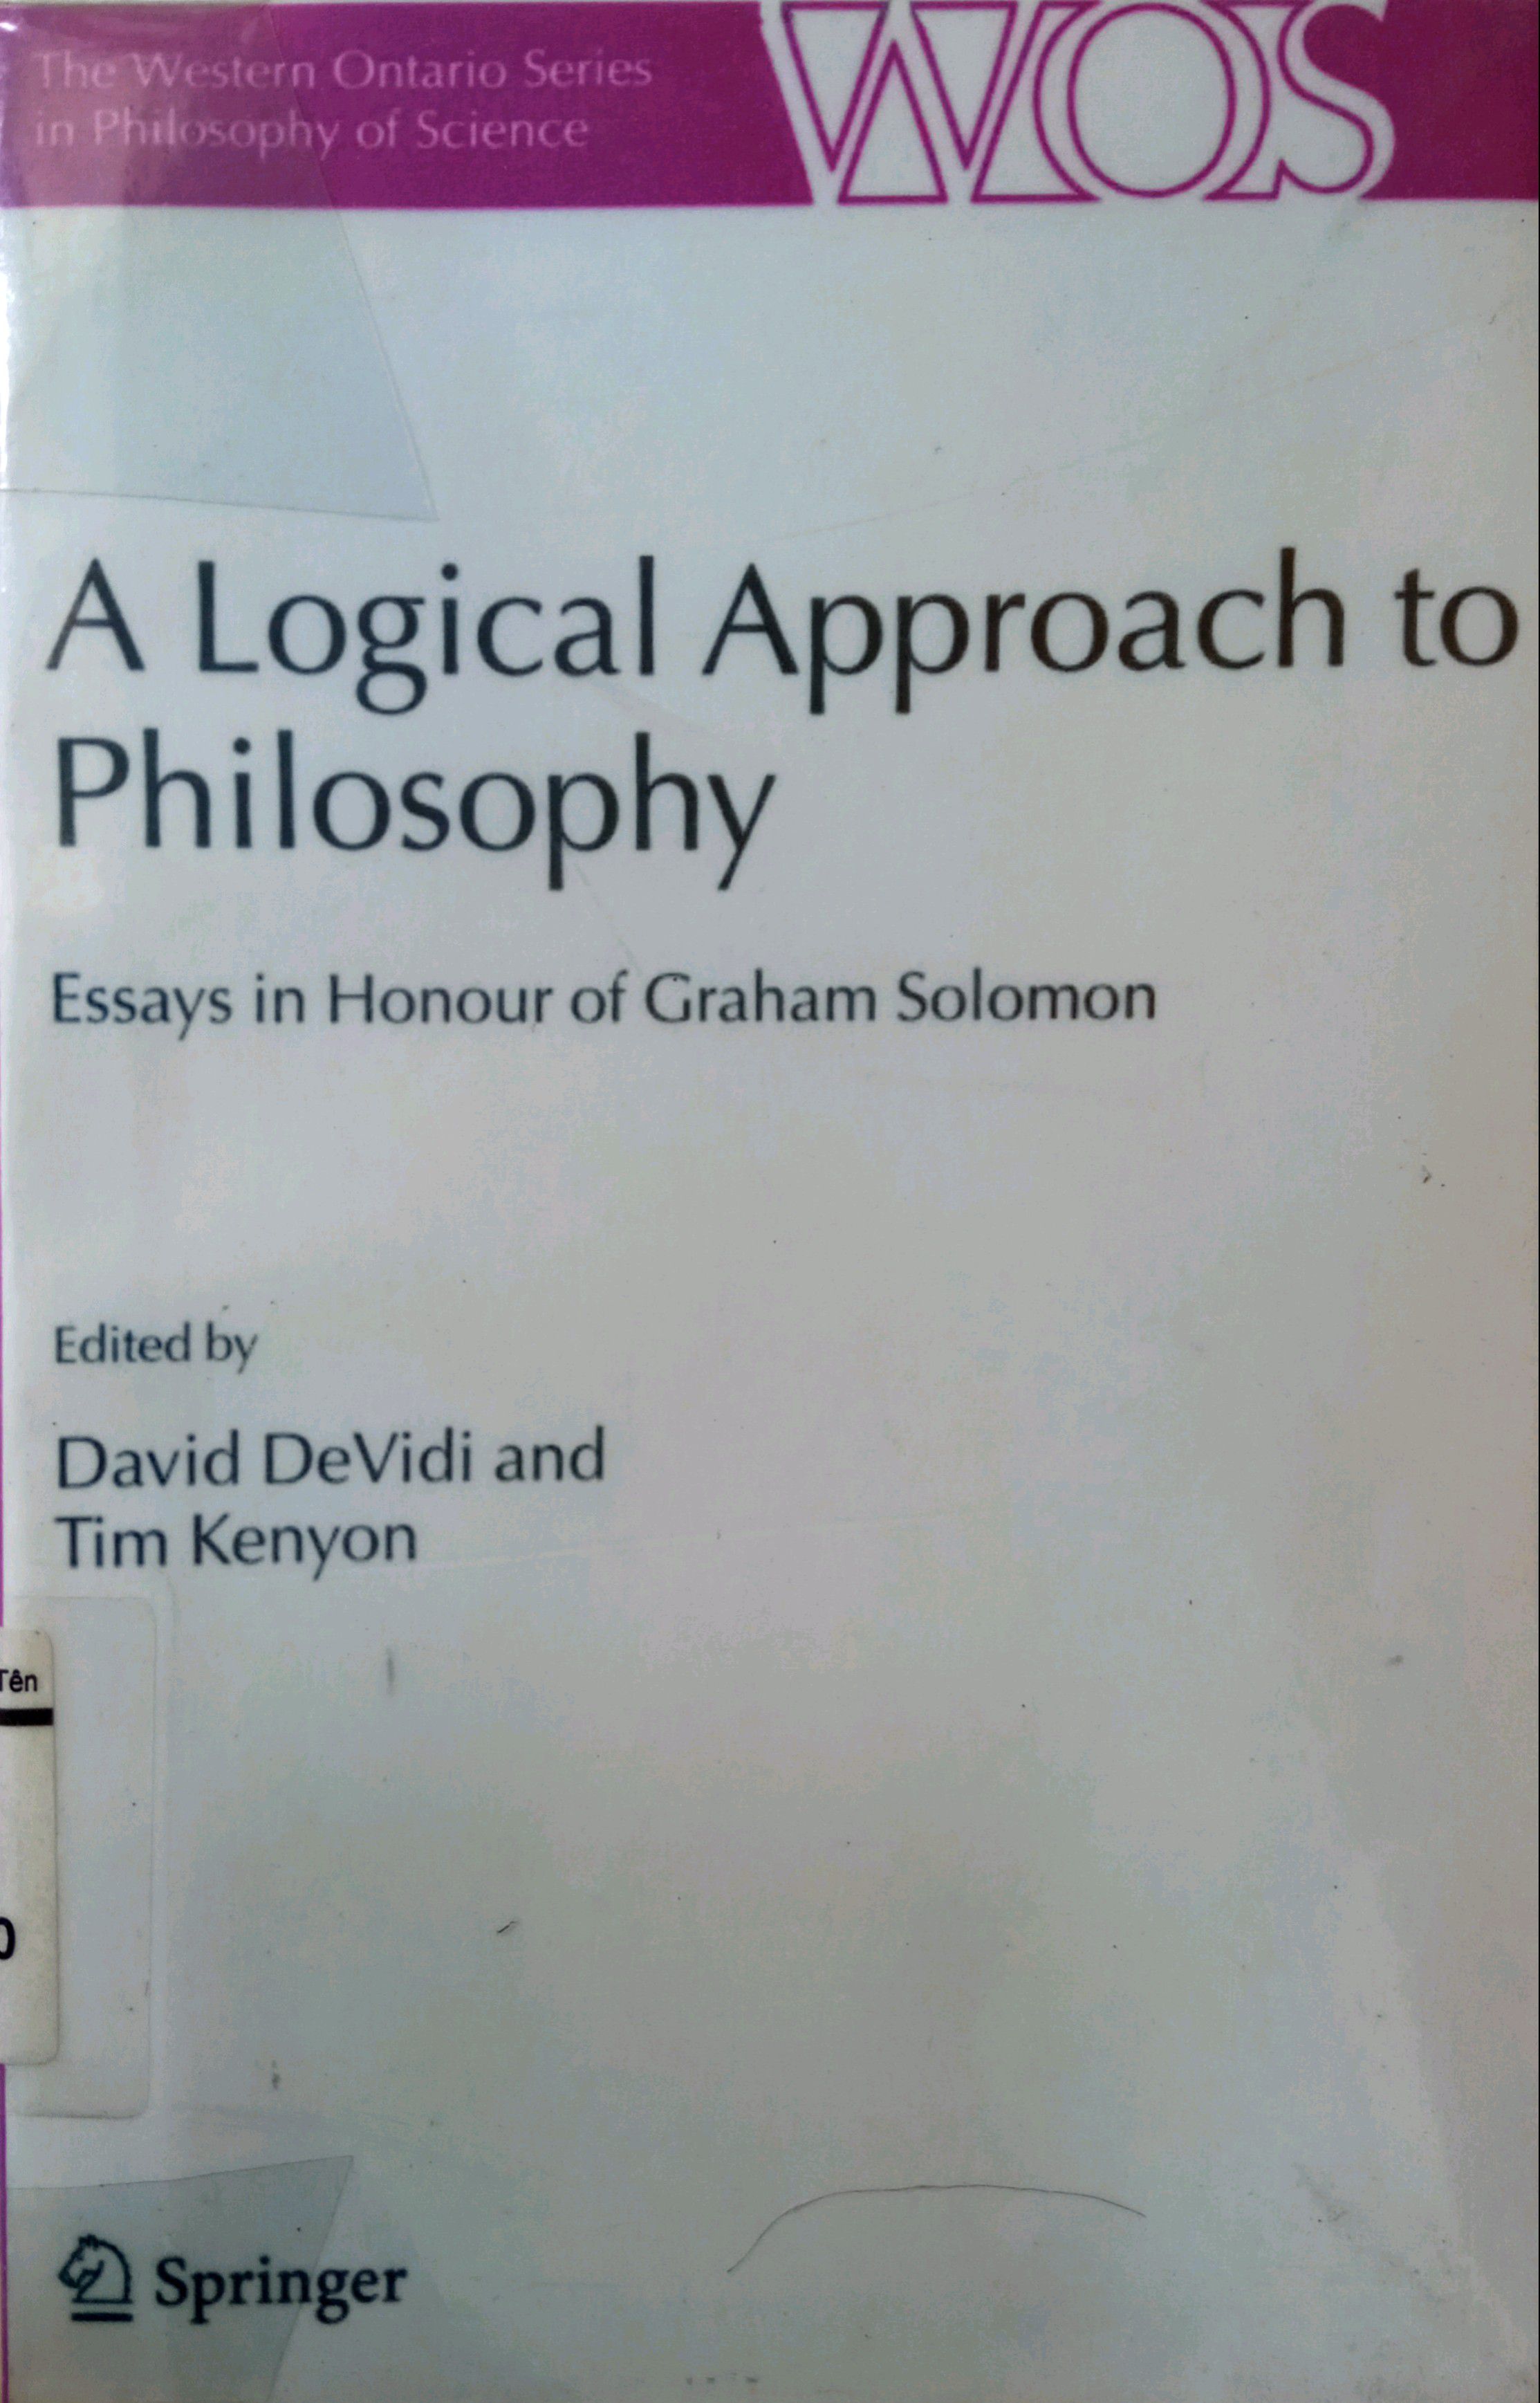 A LOGICAL APPROACH TO PHILOSOPHY